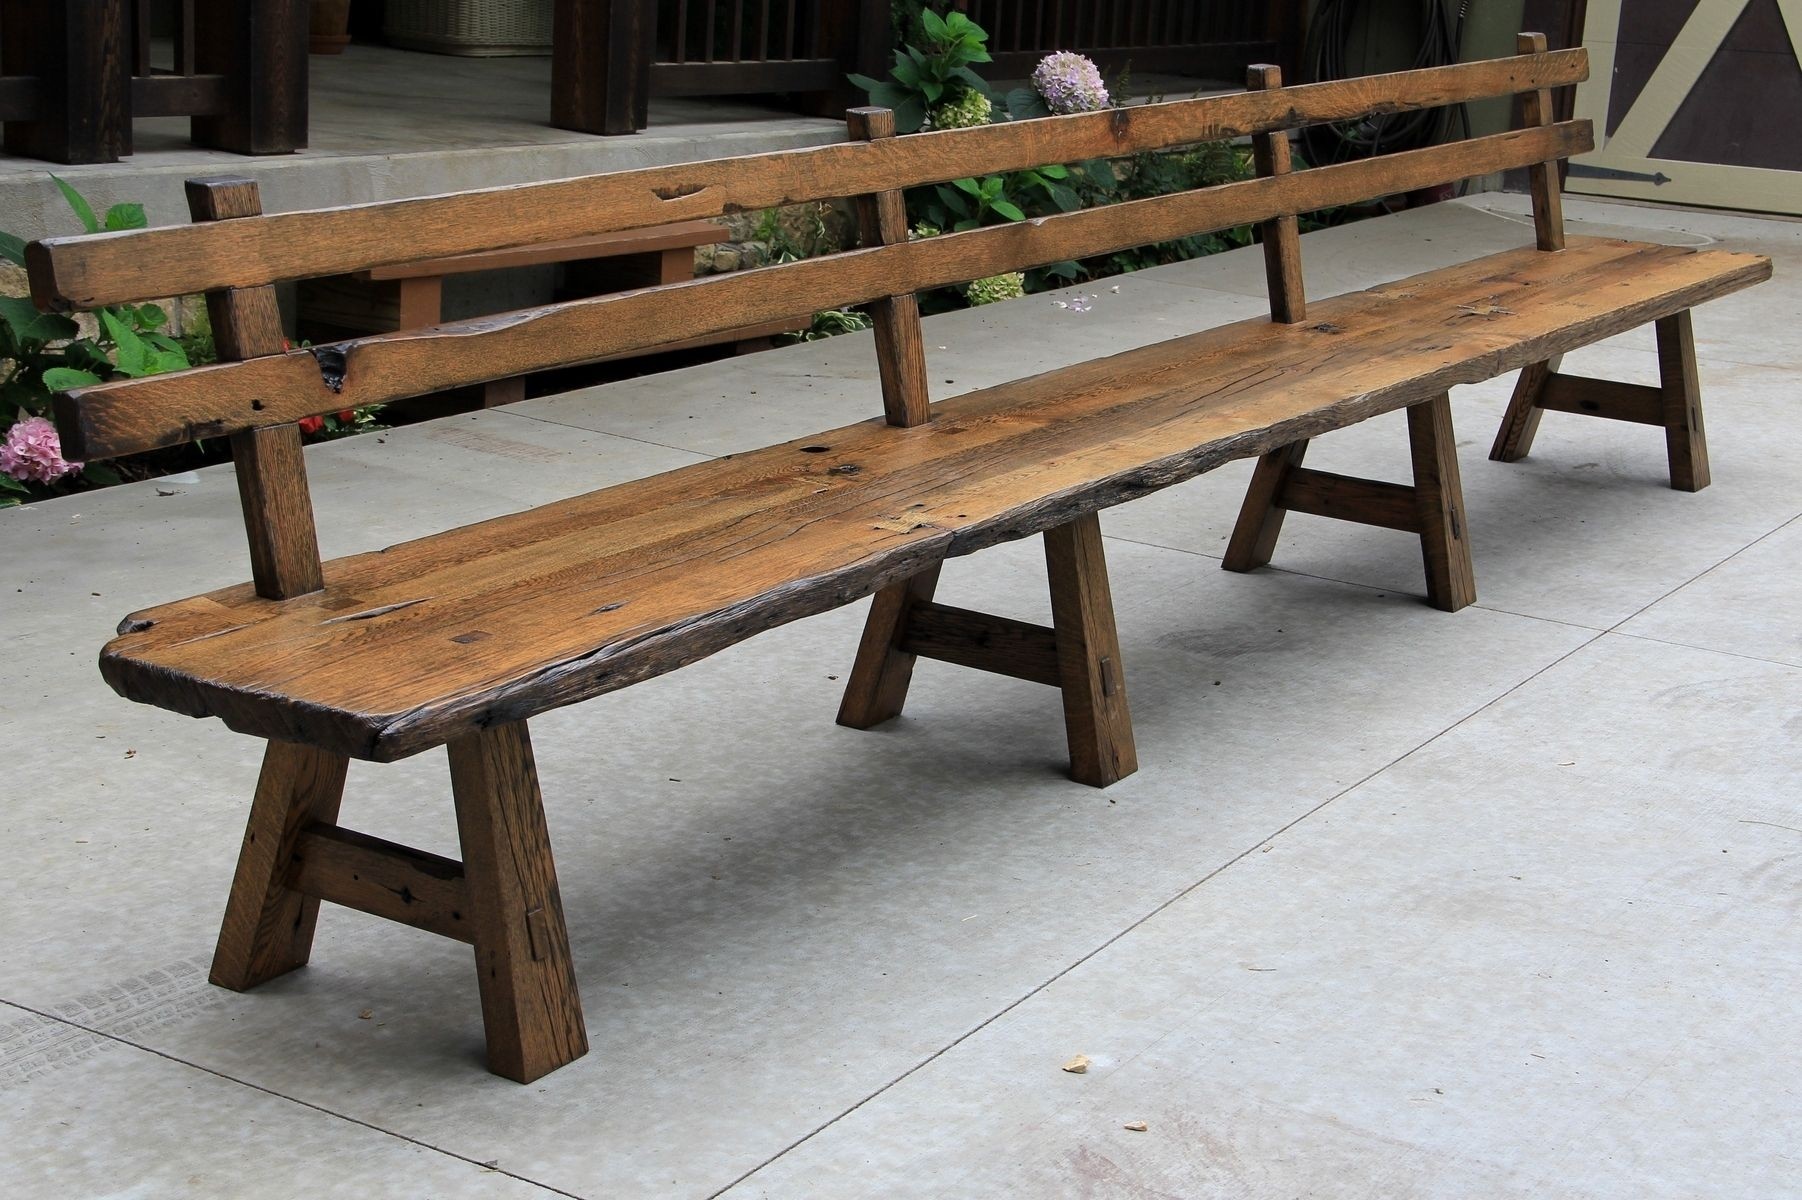 Wooden benches with backs